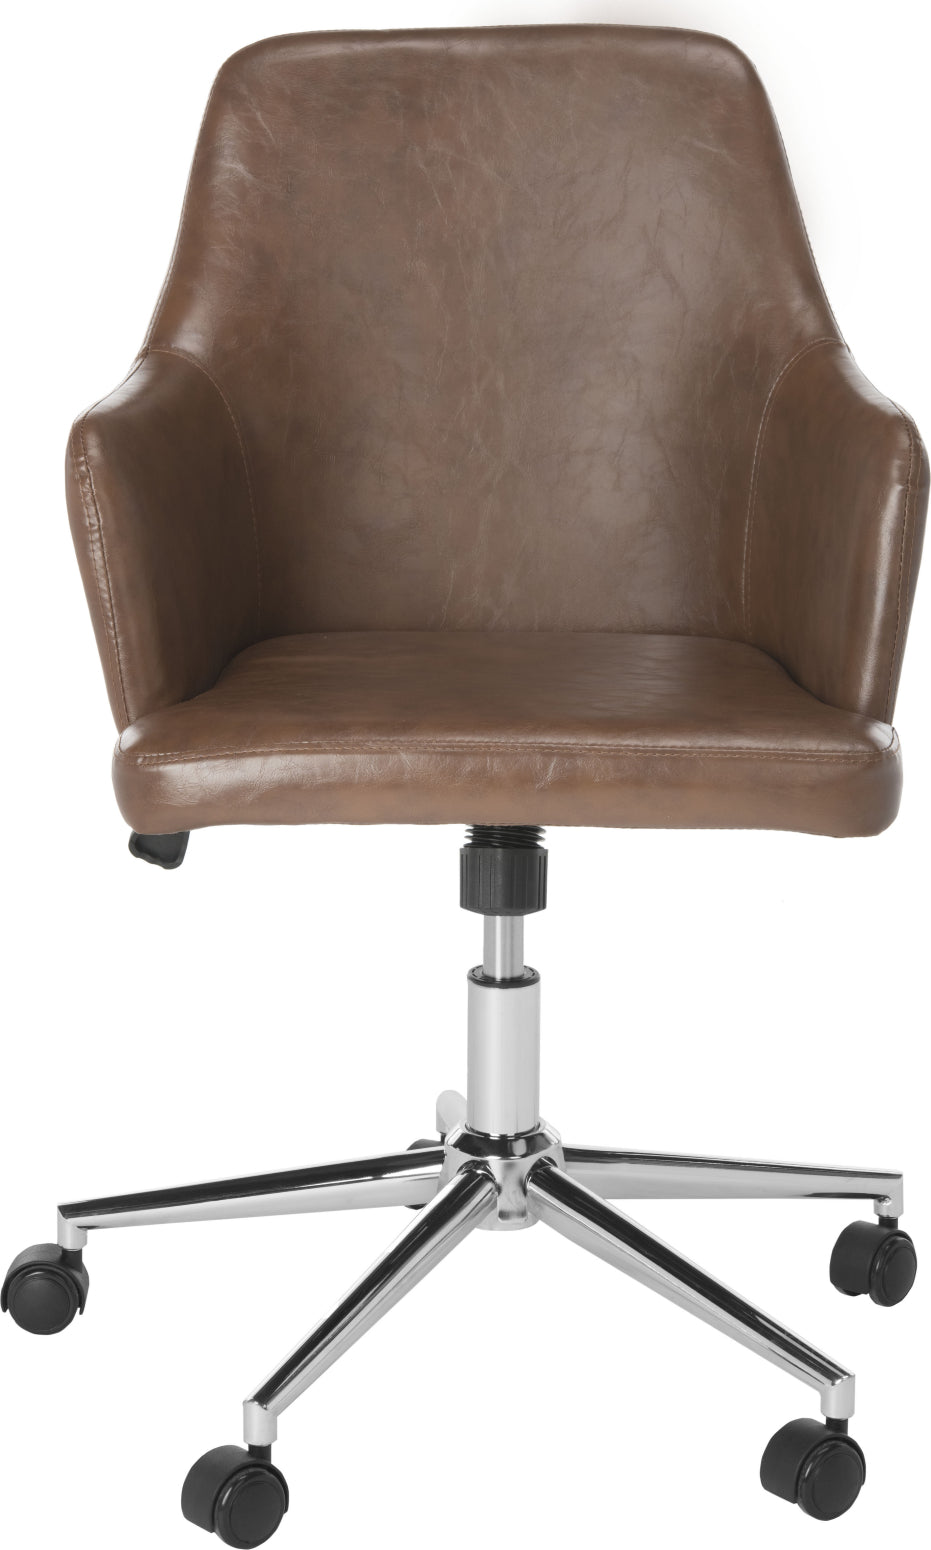 Safavieh Cadence Swivel Office Chair Brown and Chrome Furniture main image